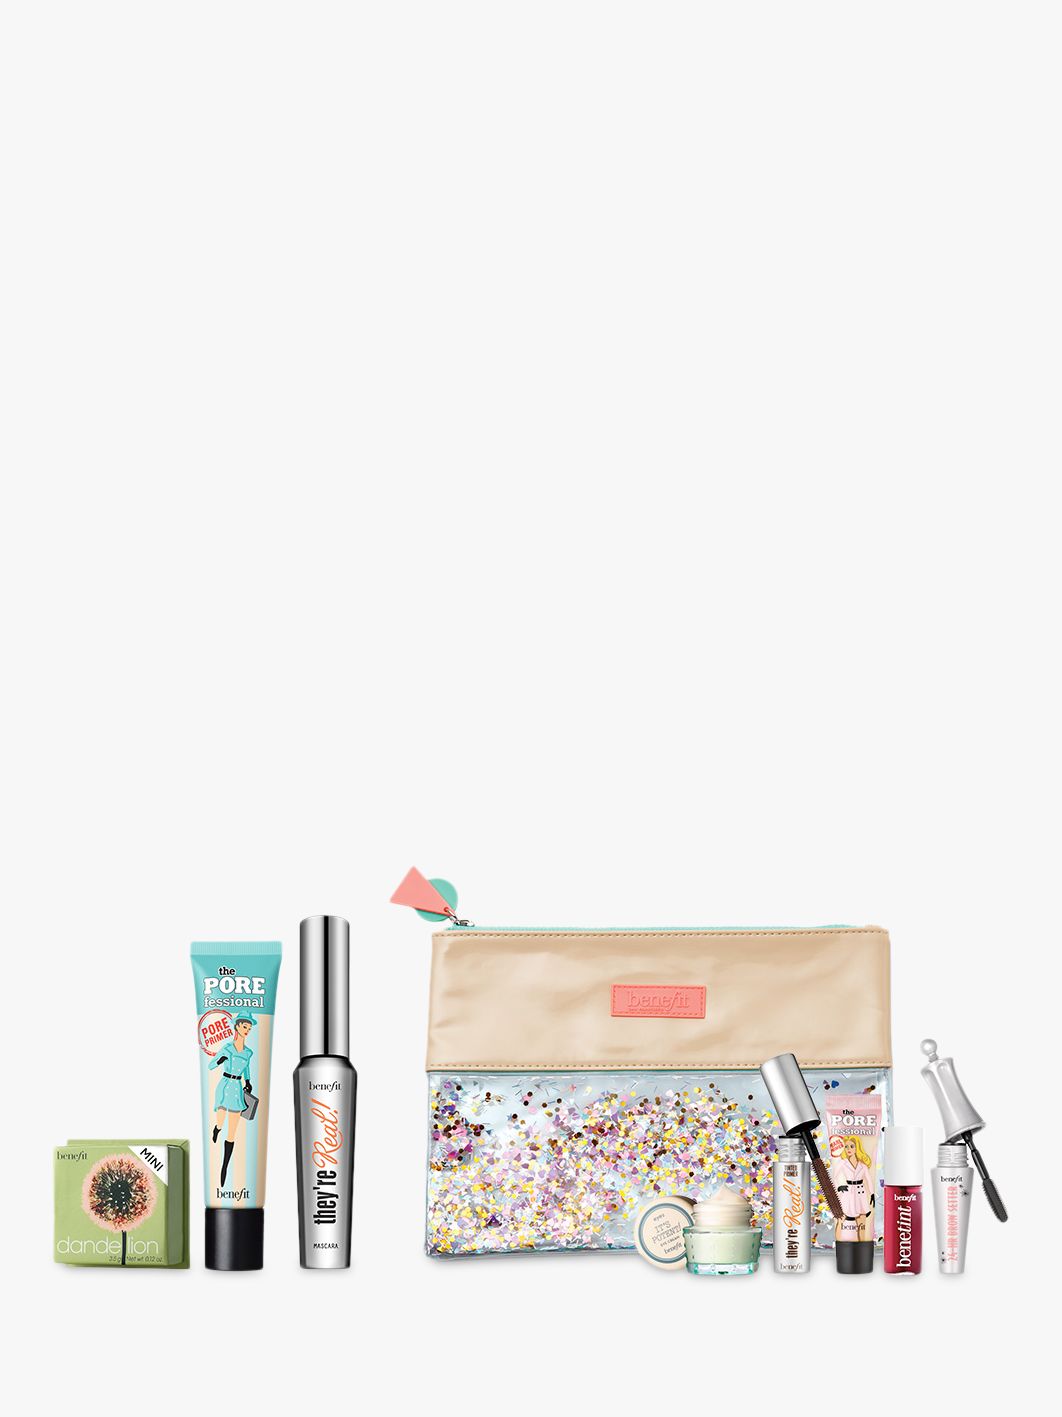 Benefit They're Real! Mascara, The POREfessional Primer and Dandelion Powder with Gift